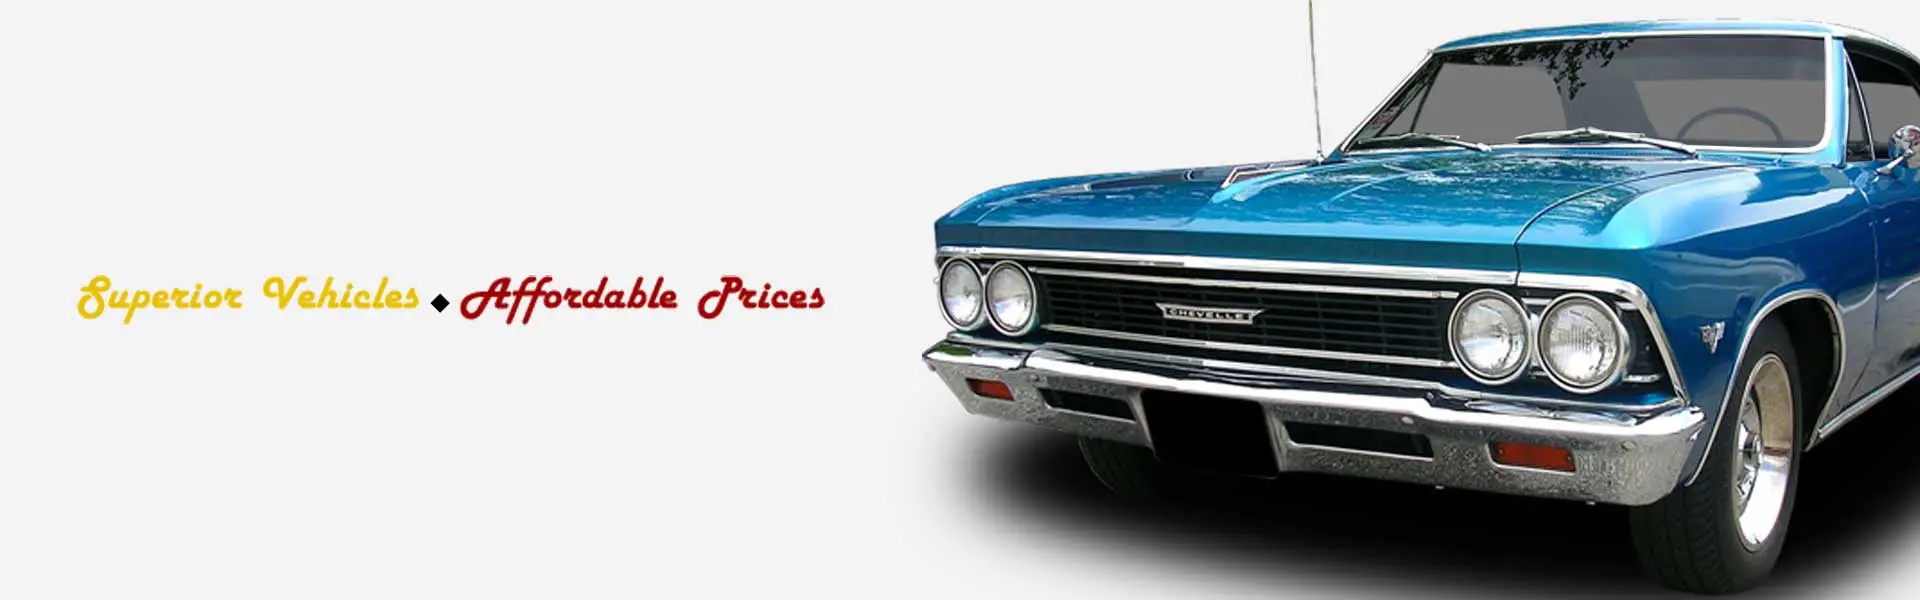 Country Classic Cars for Sale Find Your Dream Vehicle Today!